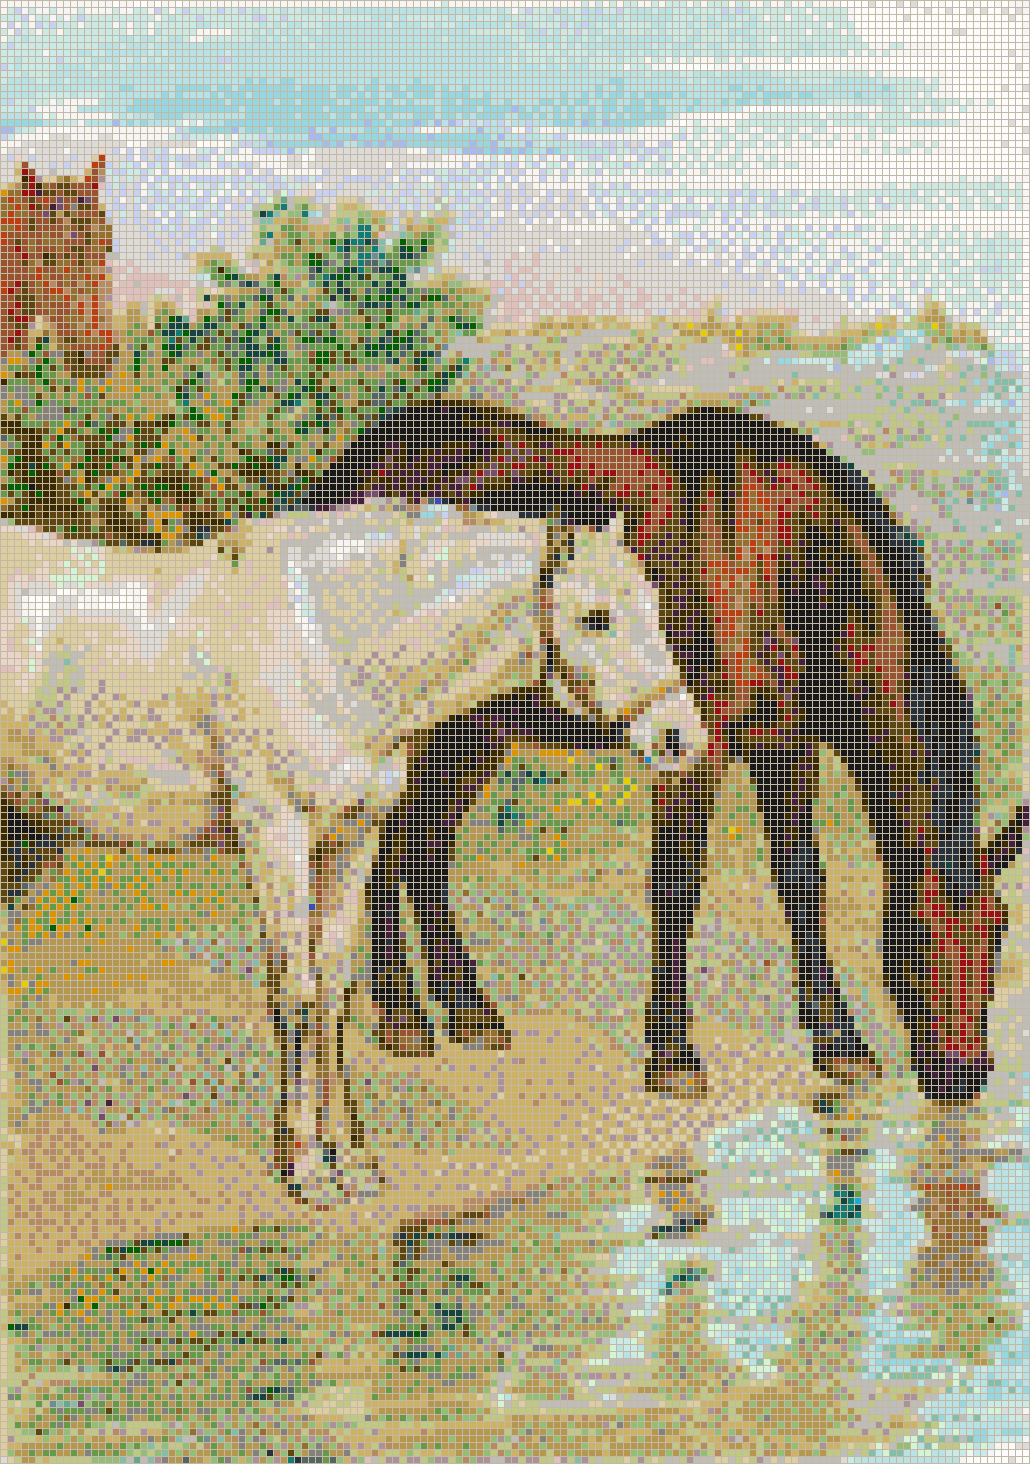 Horses Drinking - Mosaic Tile Picture Art